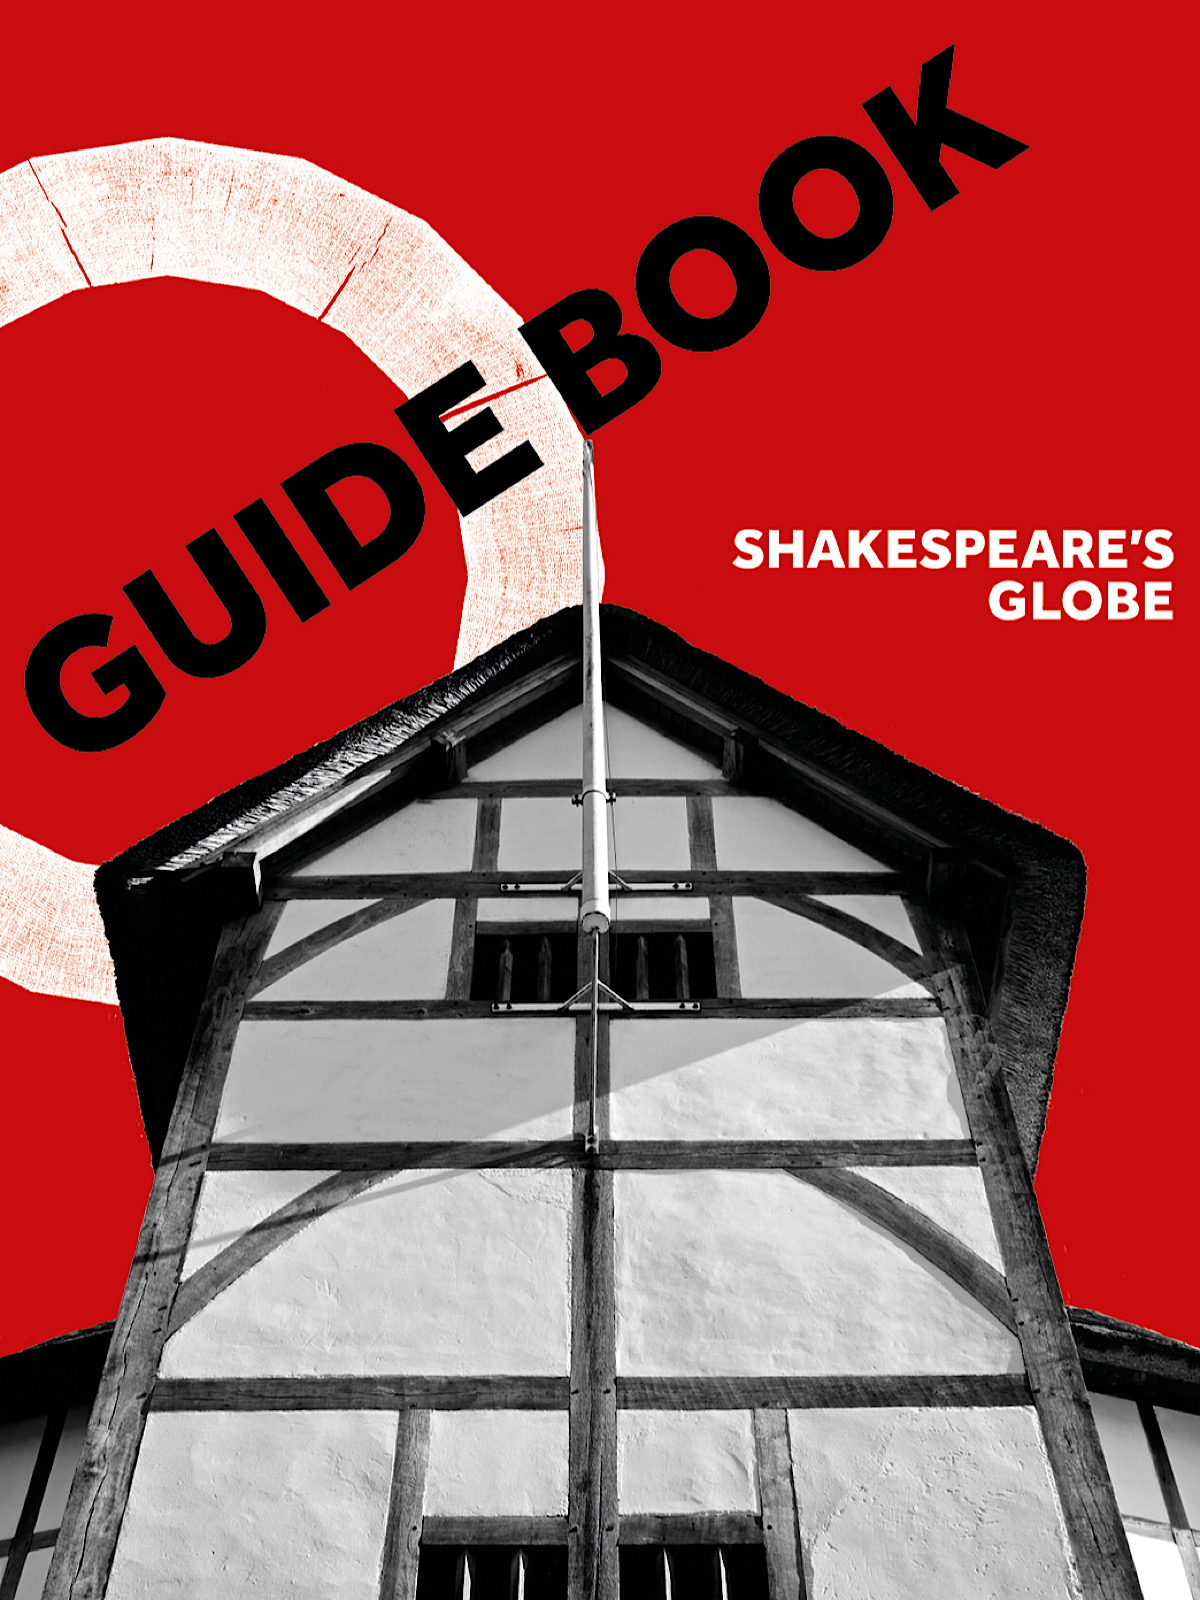 An collage graphic has a bright red background, a black and white image of a timber framed theatre and the word ‘guidebook’ at the top